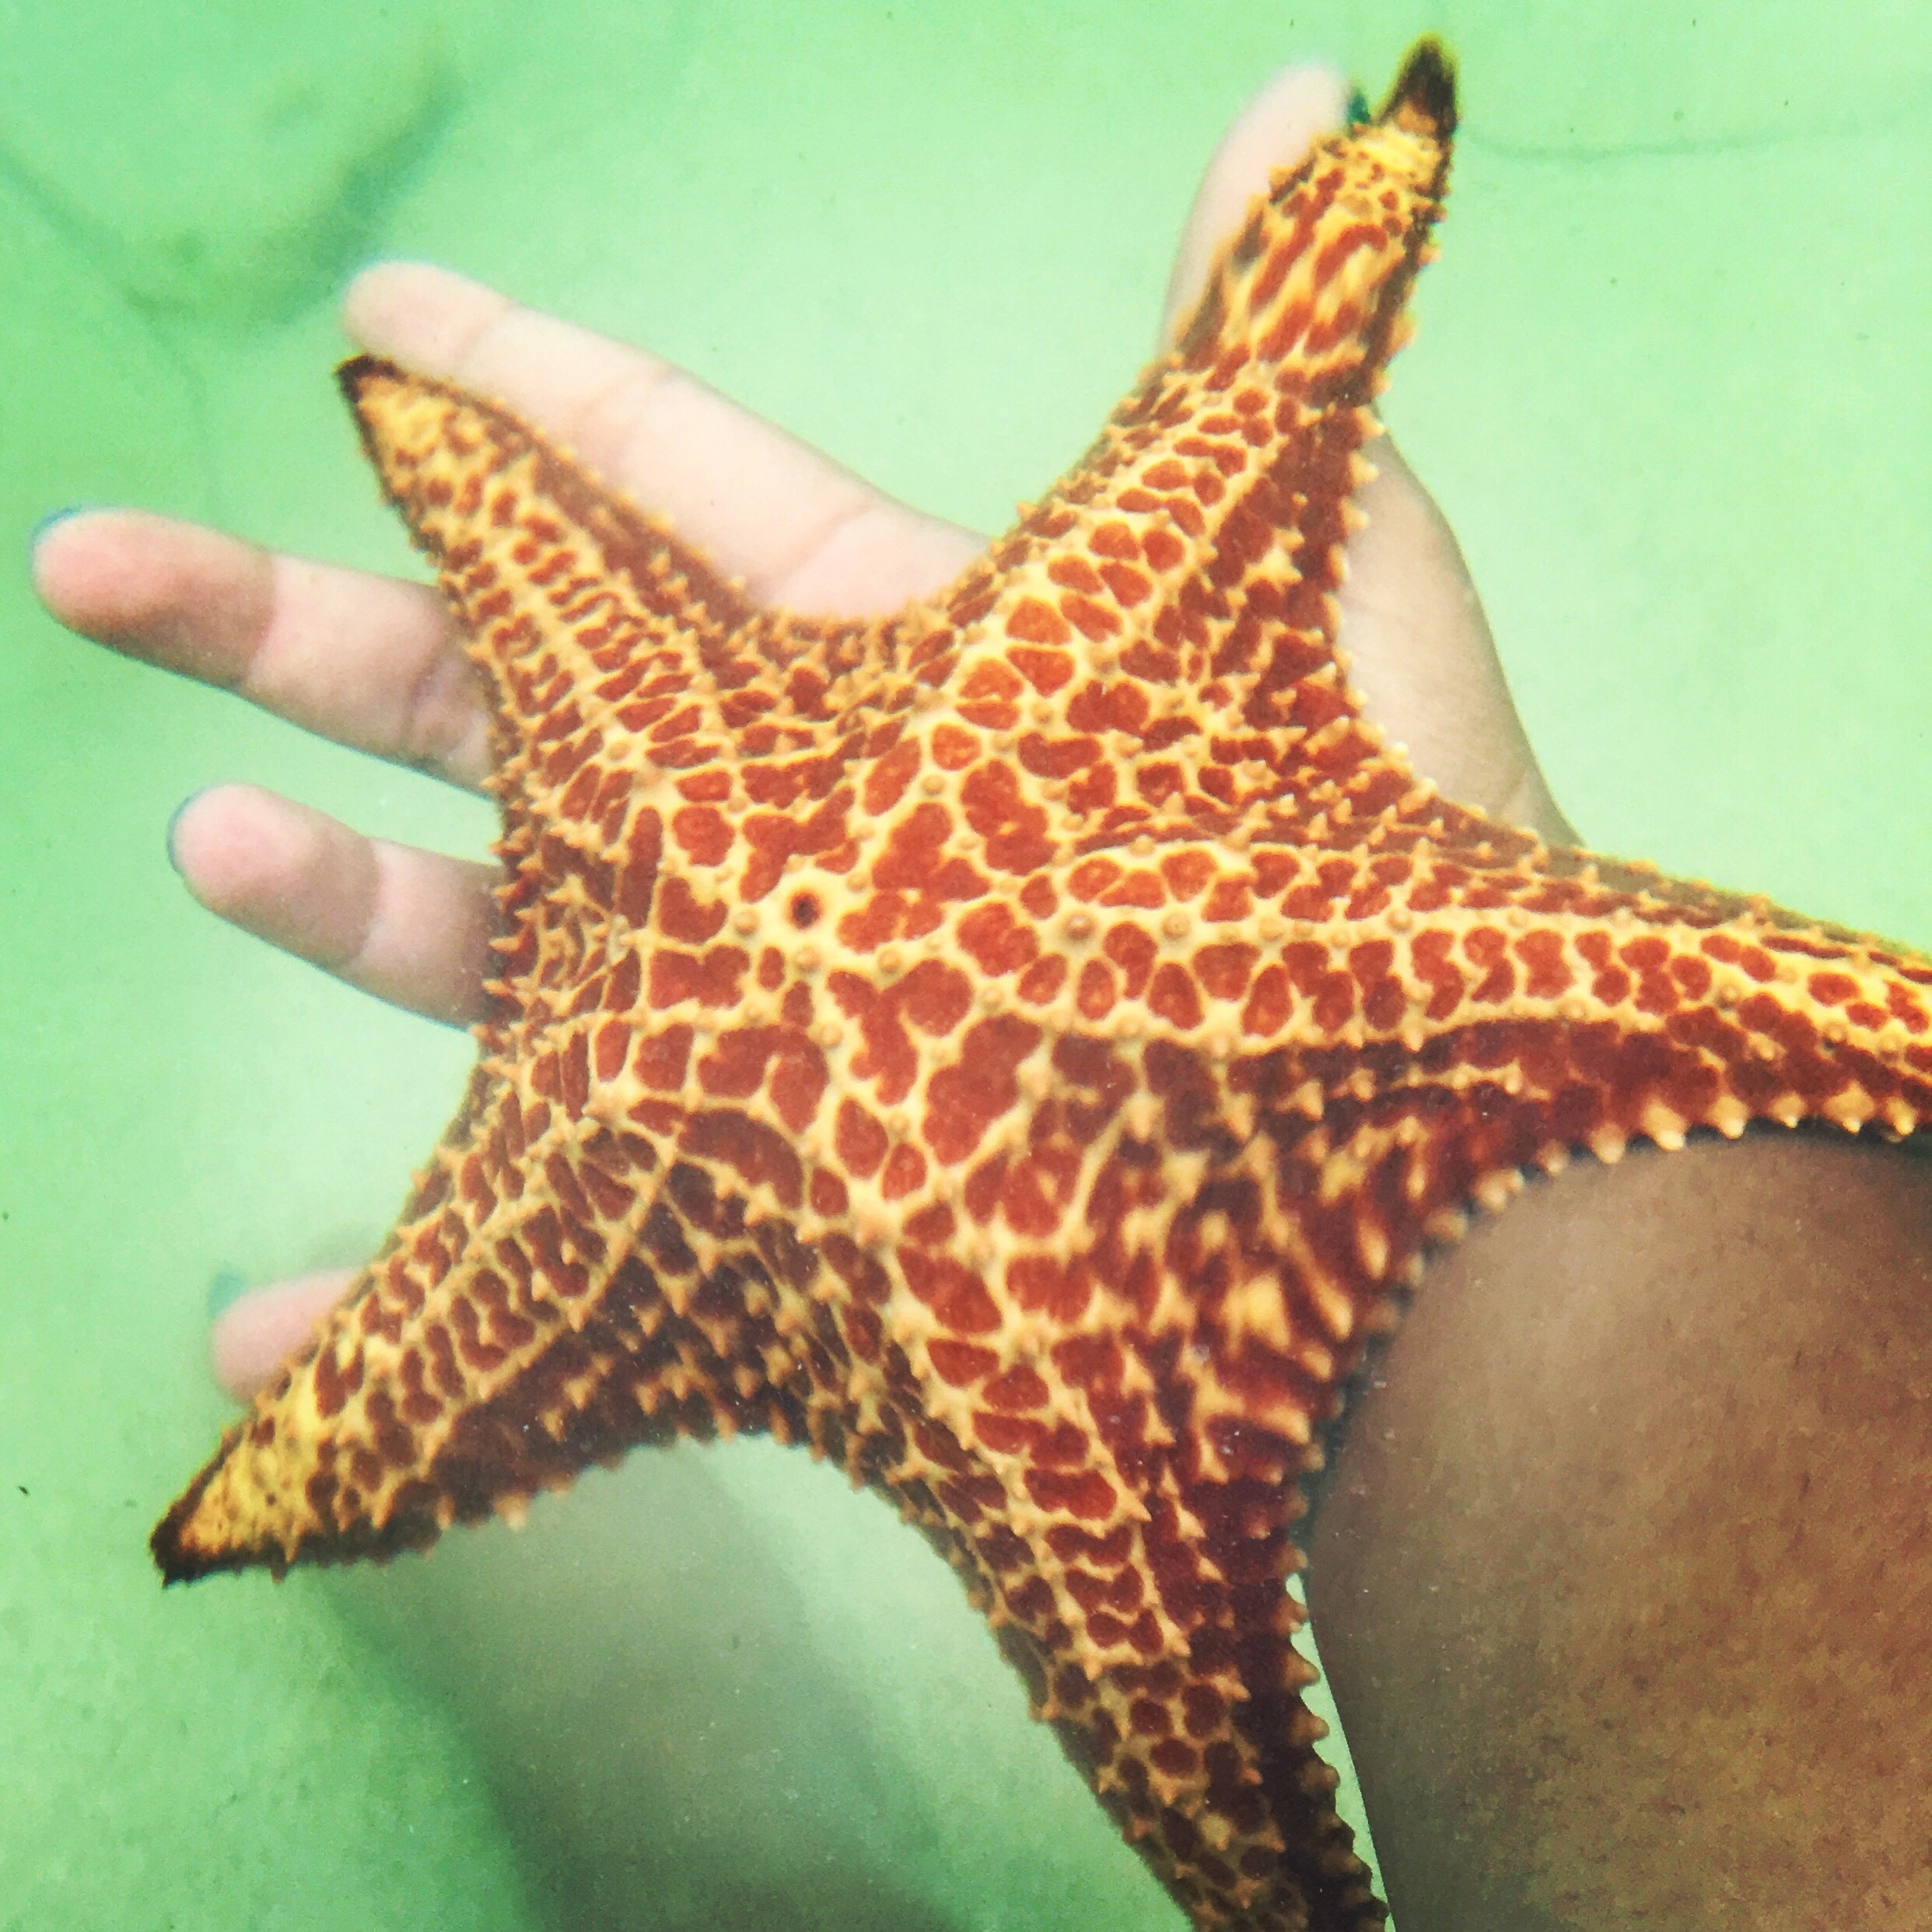 If you’ve ever wanted to touch starfish, go to Starfish Point in Grand Cayman. Always keep the starfish in water. Pick them up and flip them over but set them down gently right side up. #LifeAtExpedia #GrandCayman #Starfish #OceanLife